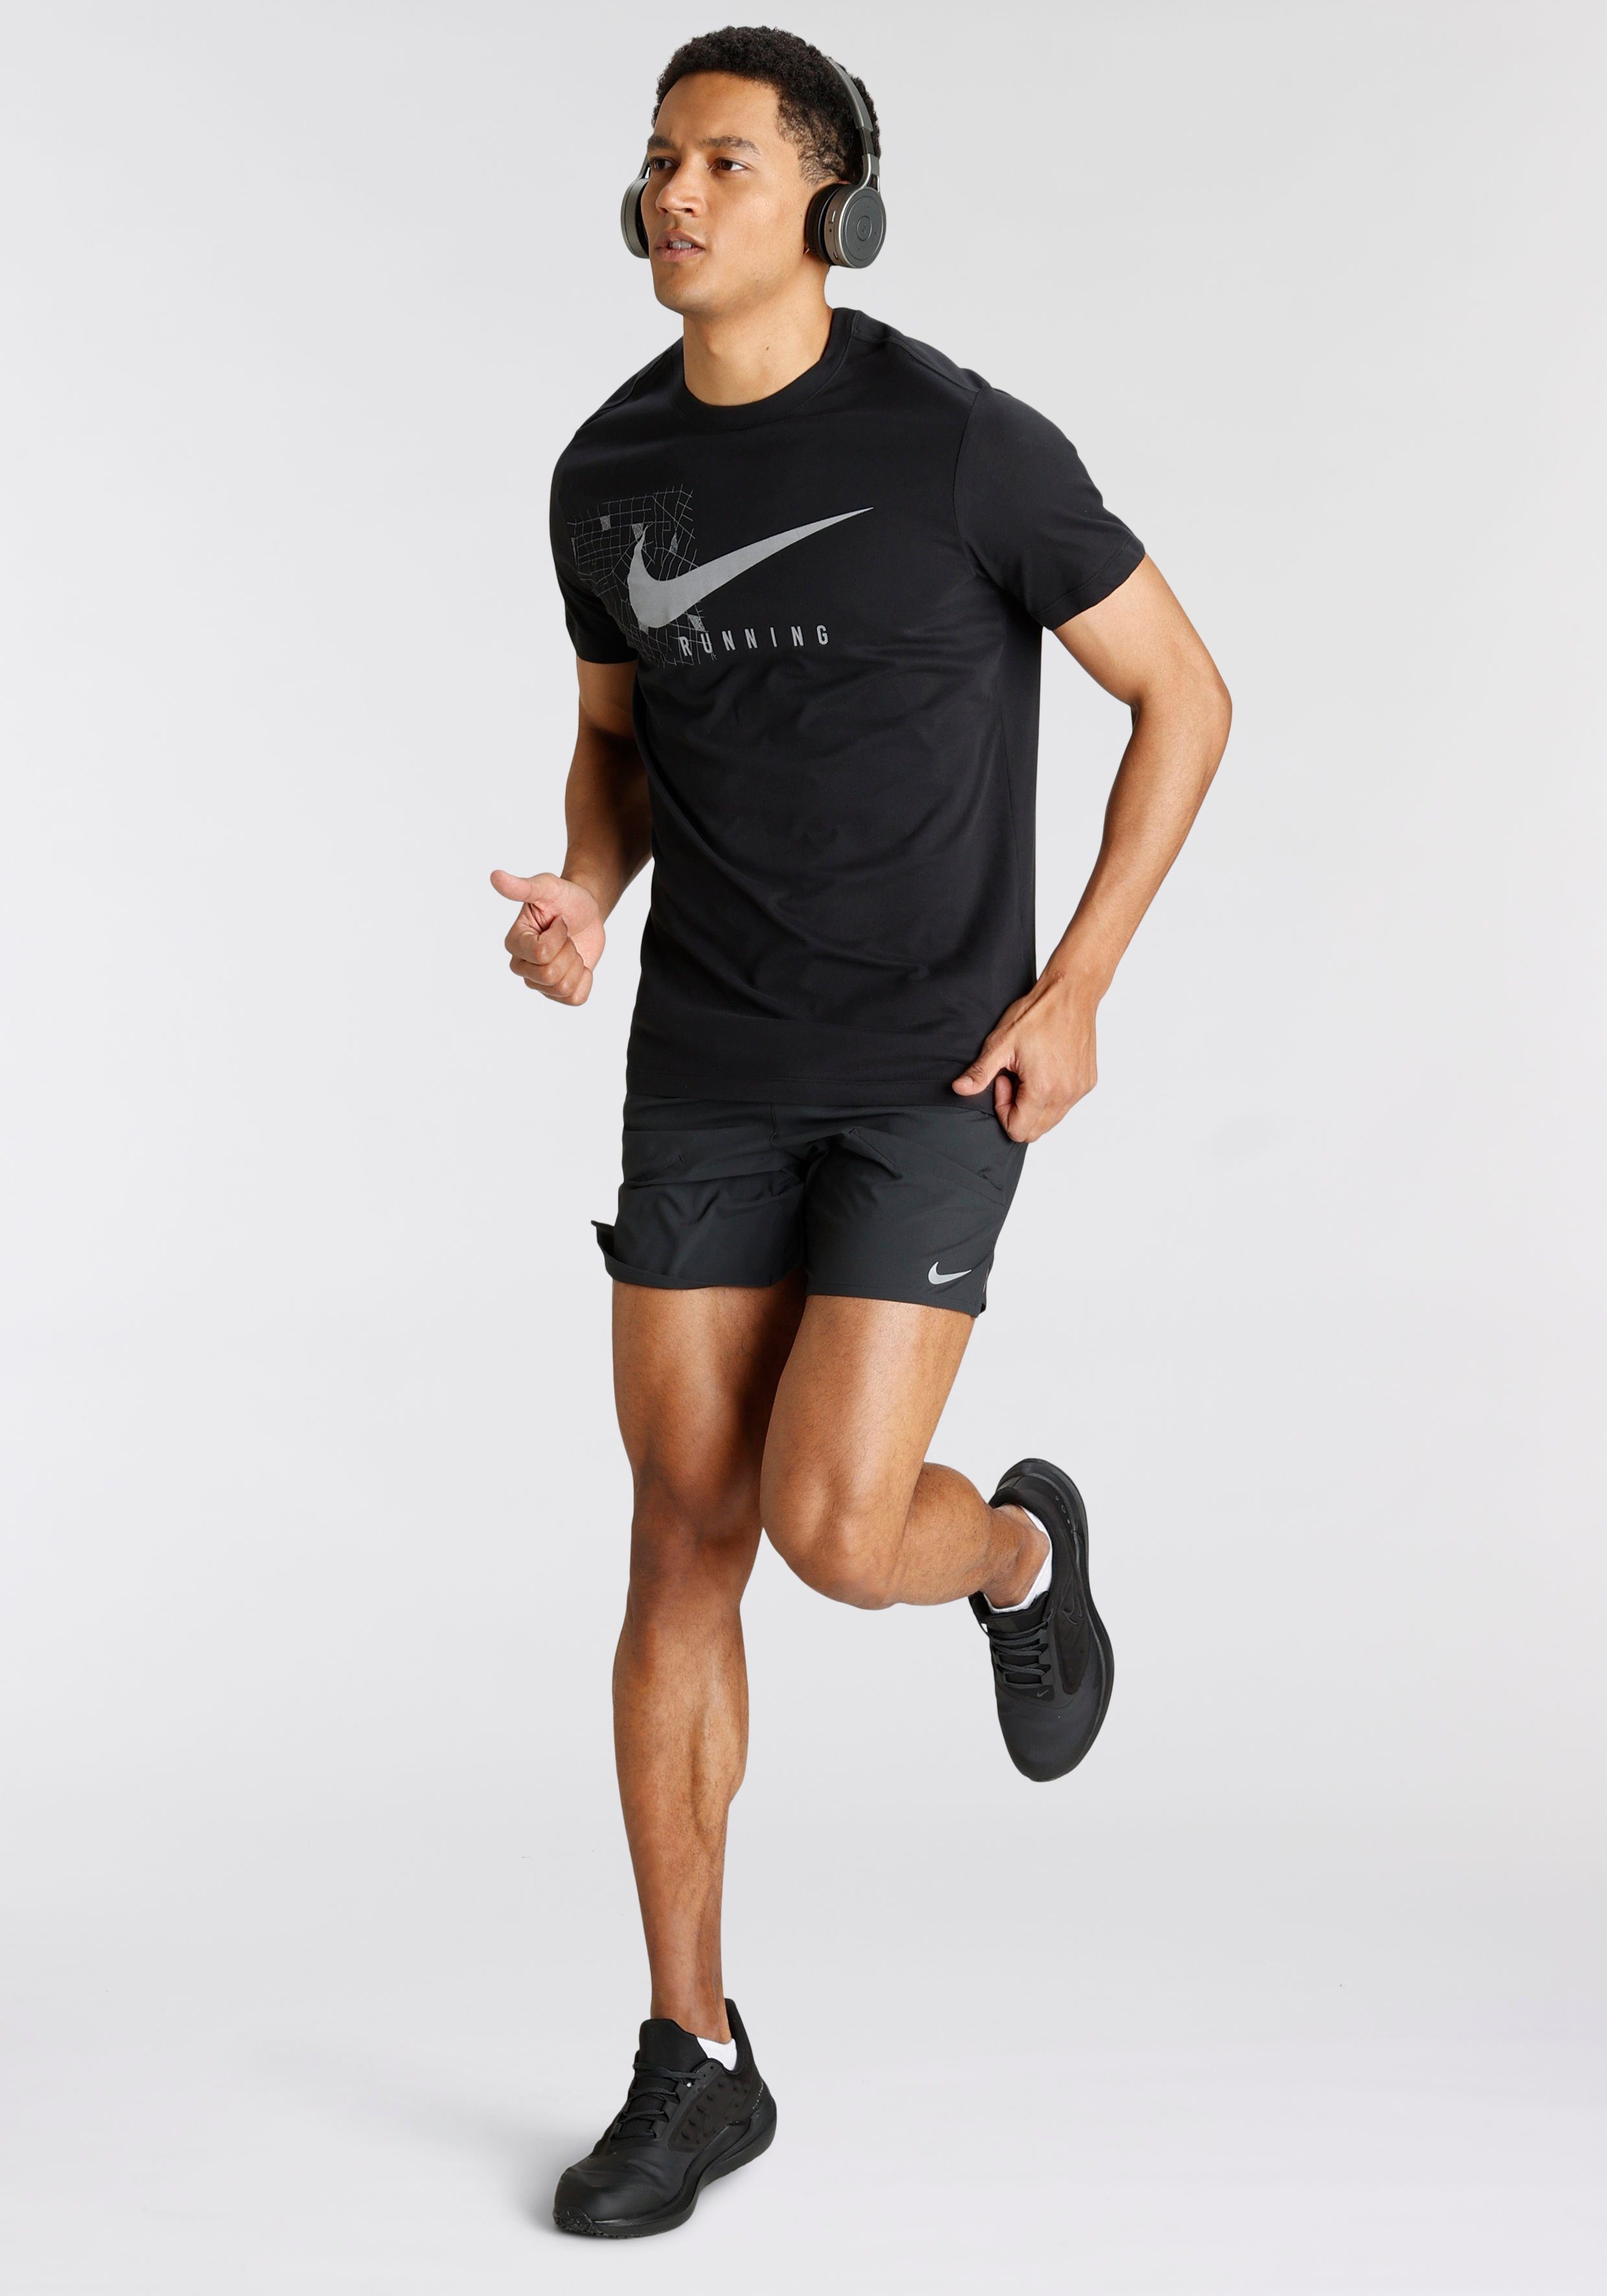 Dri-FIT Men's Nike Shorts Brief-Lined " Stride Running Laufshorts